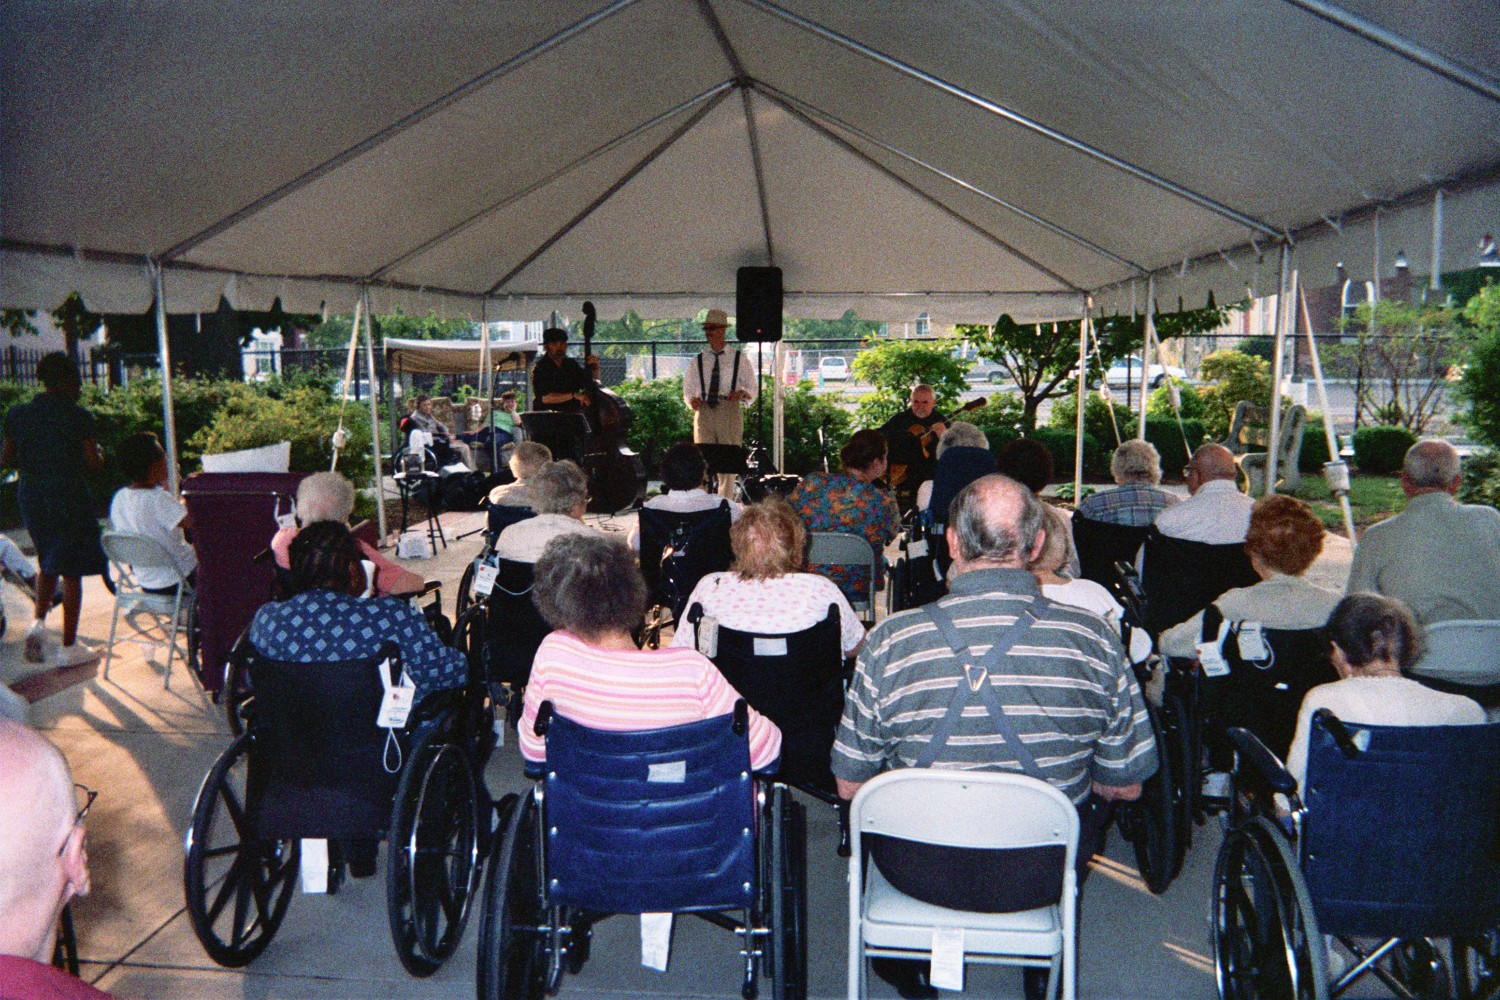 The crowd under the tent at the July 4th Homeland Center event
